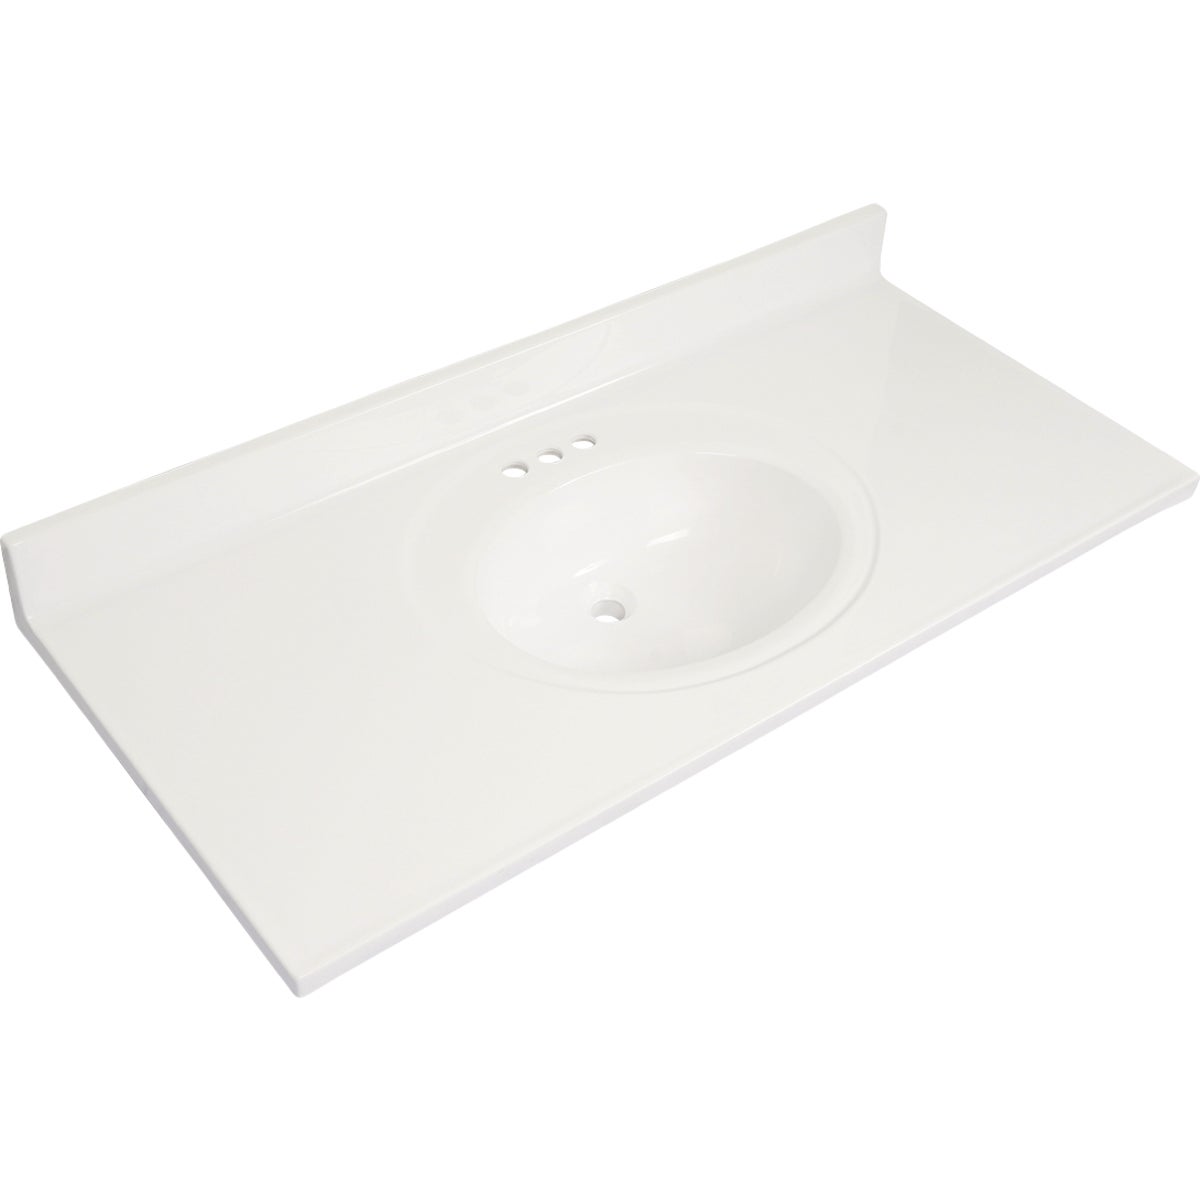 Modular Vanity Tops 49 In. W x 22 In. D Solid White Cultured Marble Flat Edge Single Sink Vanity Top with Oval Bowl